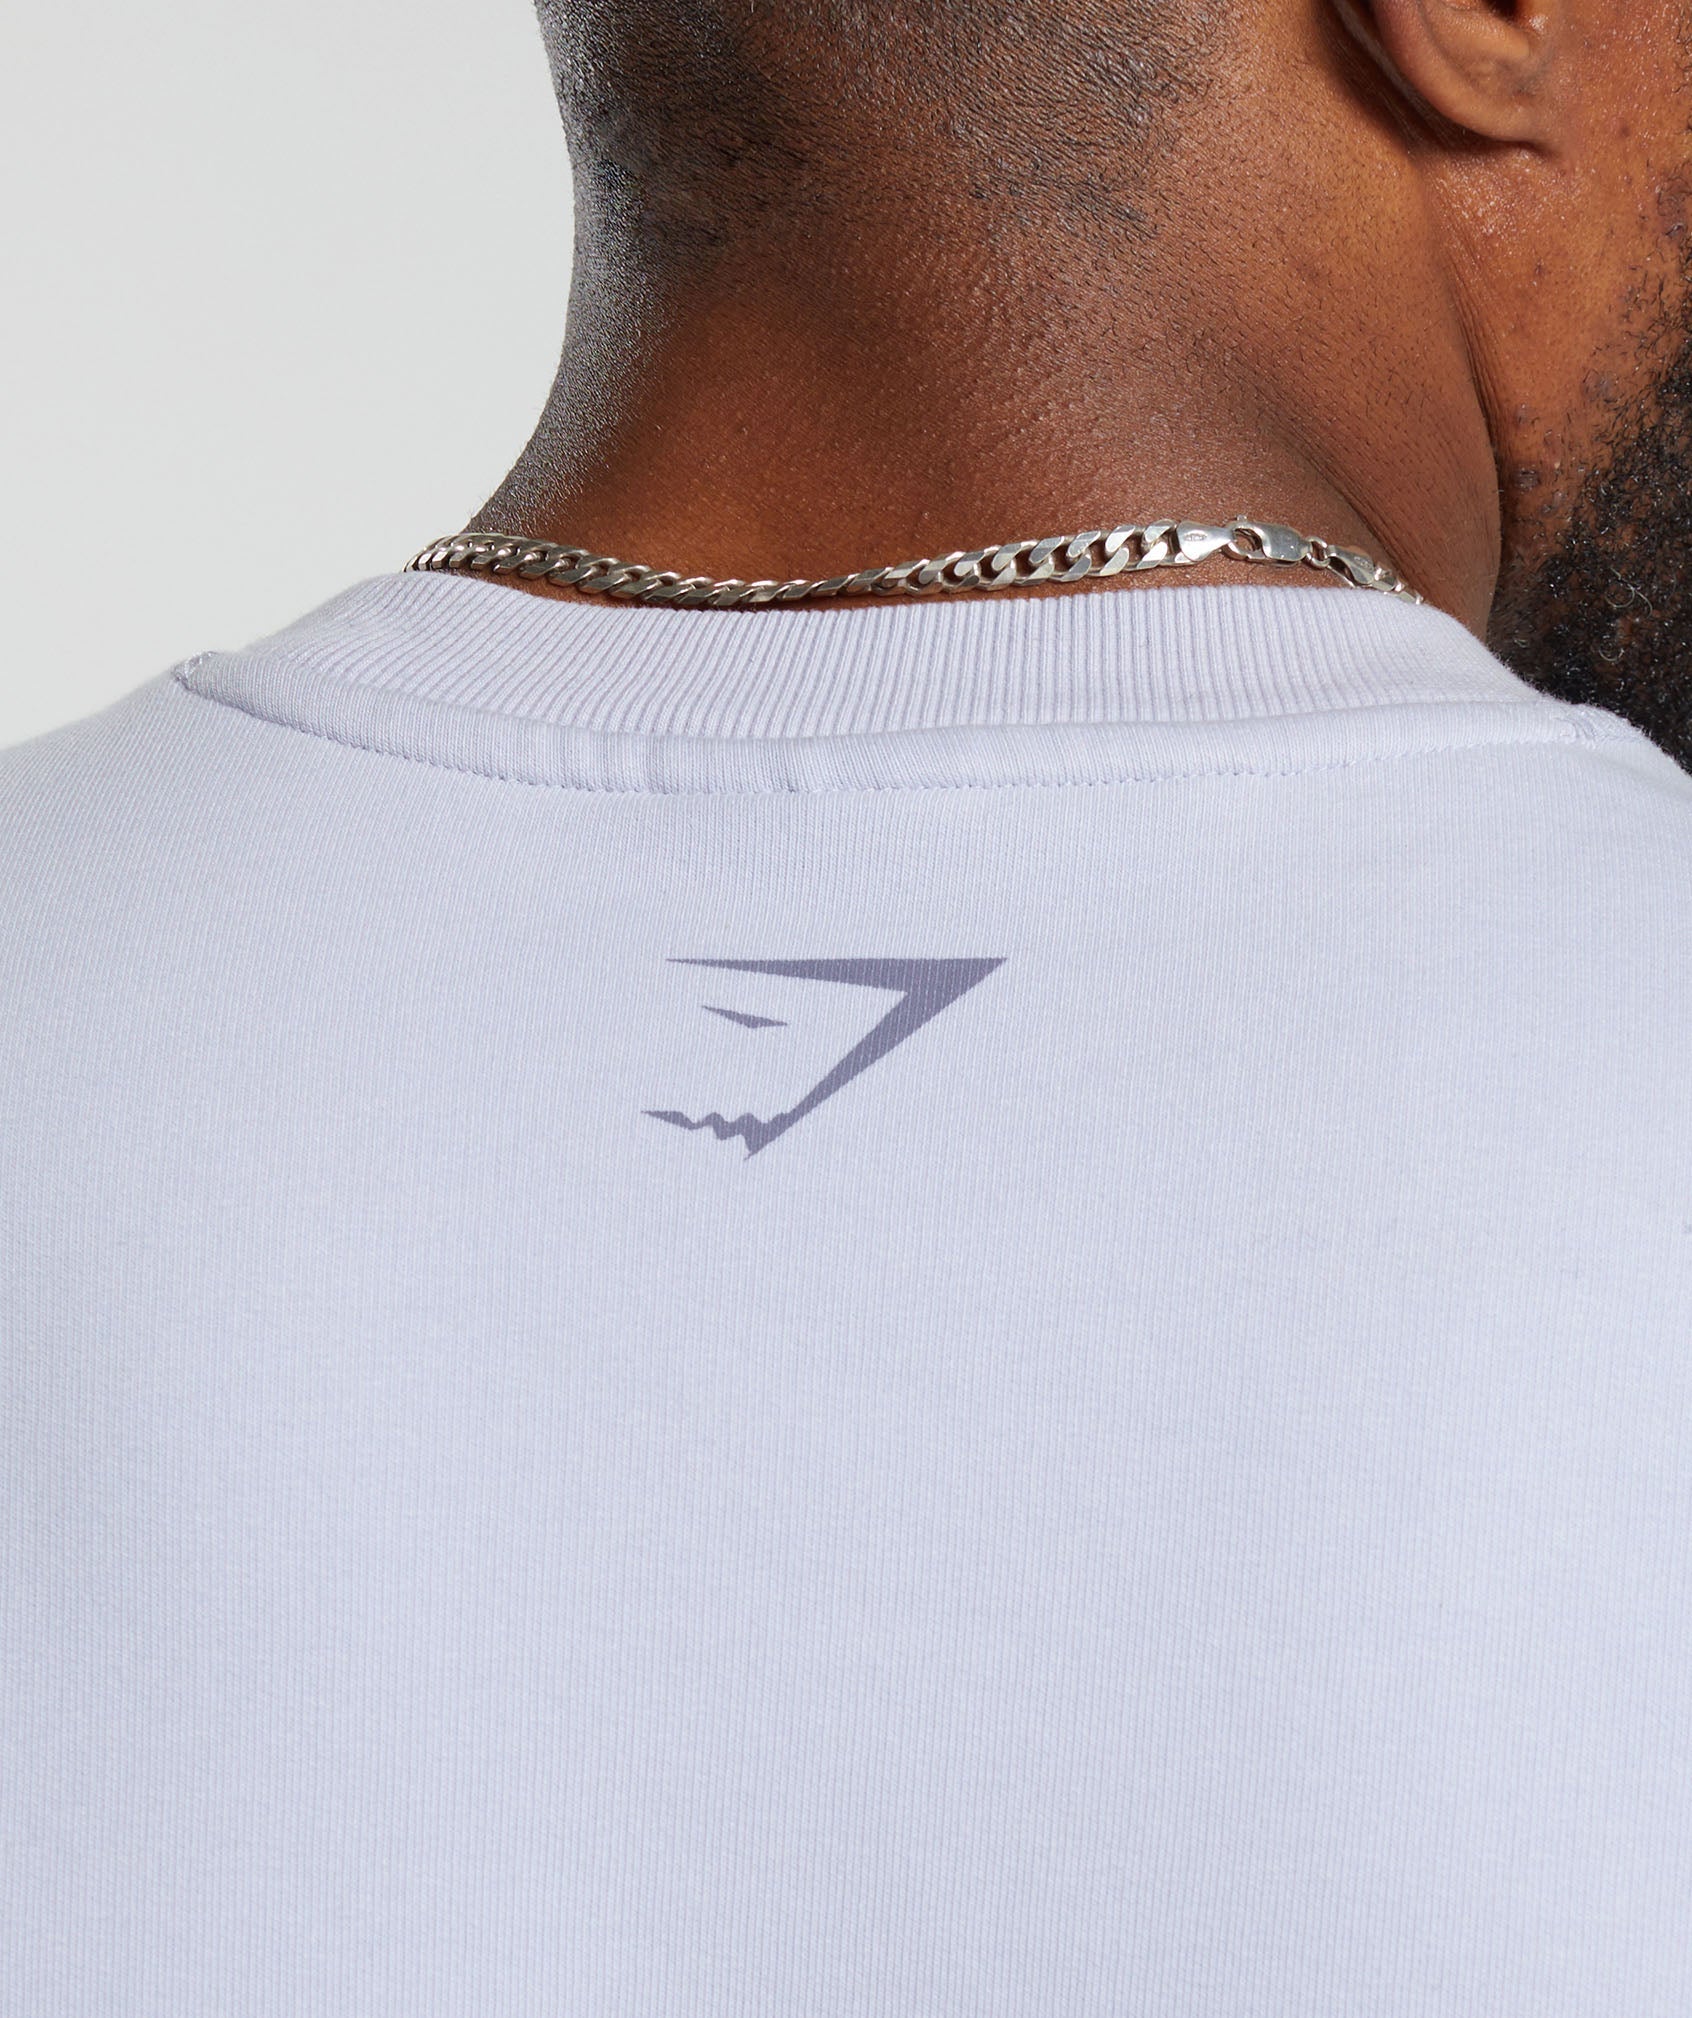 Heritage Washed Short Sleeve Crew in Silver Lilac - view 6